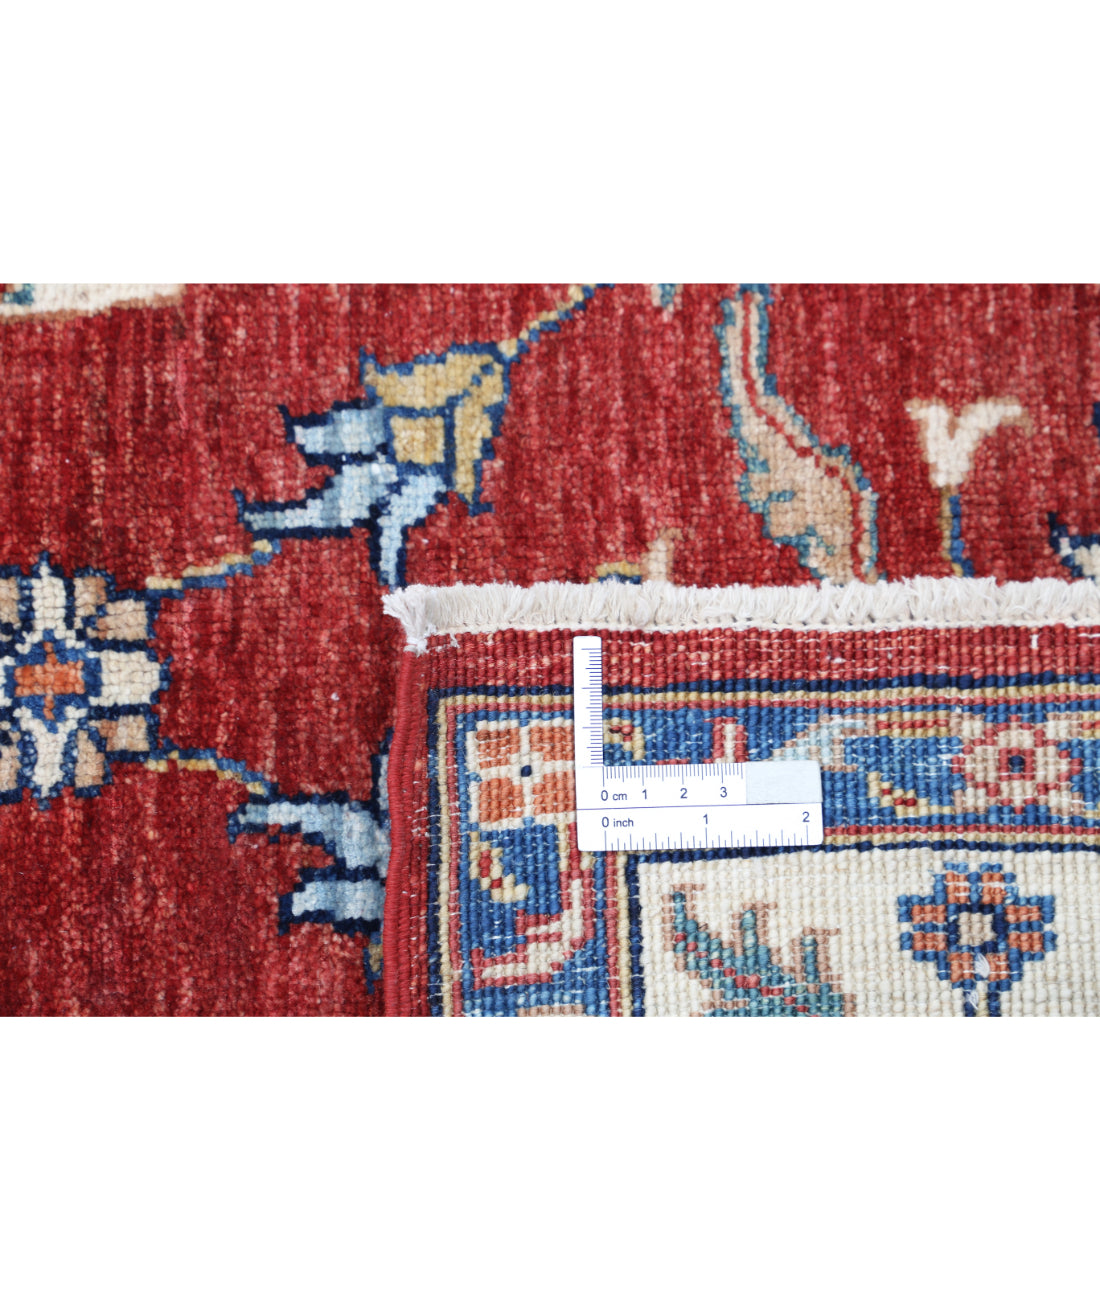 Hand Knotted Ziegler Farhan Wool Rug - 4'10'' x 6'9'' 4'10'' x 6'9'' (145 X 203) / Red / Ivory